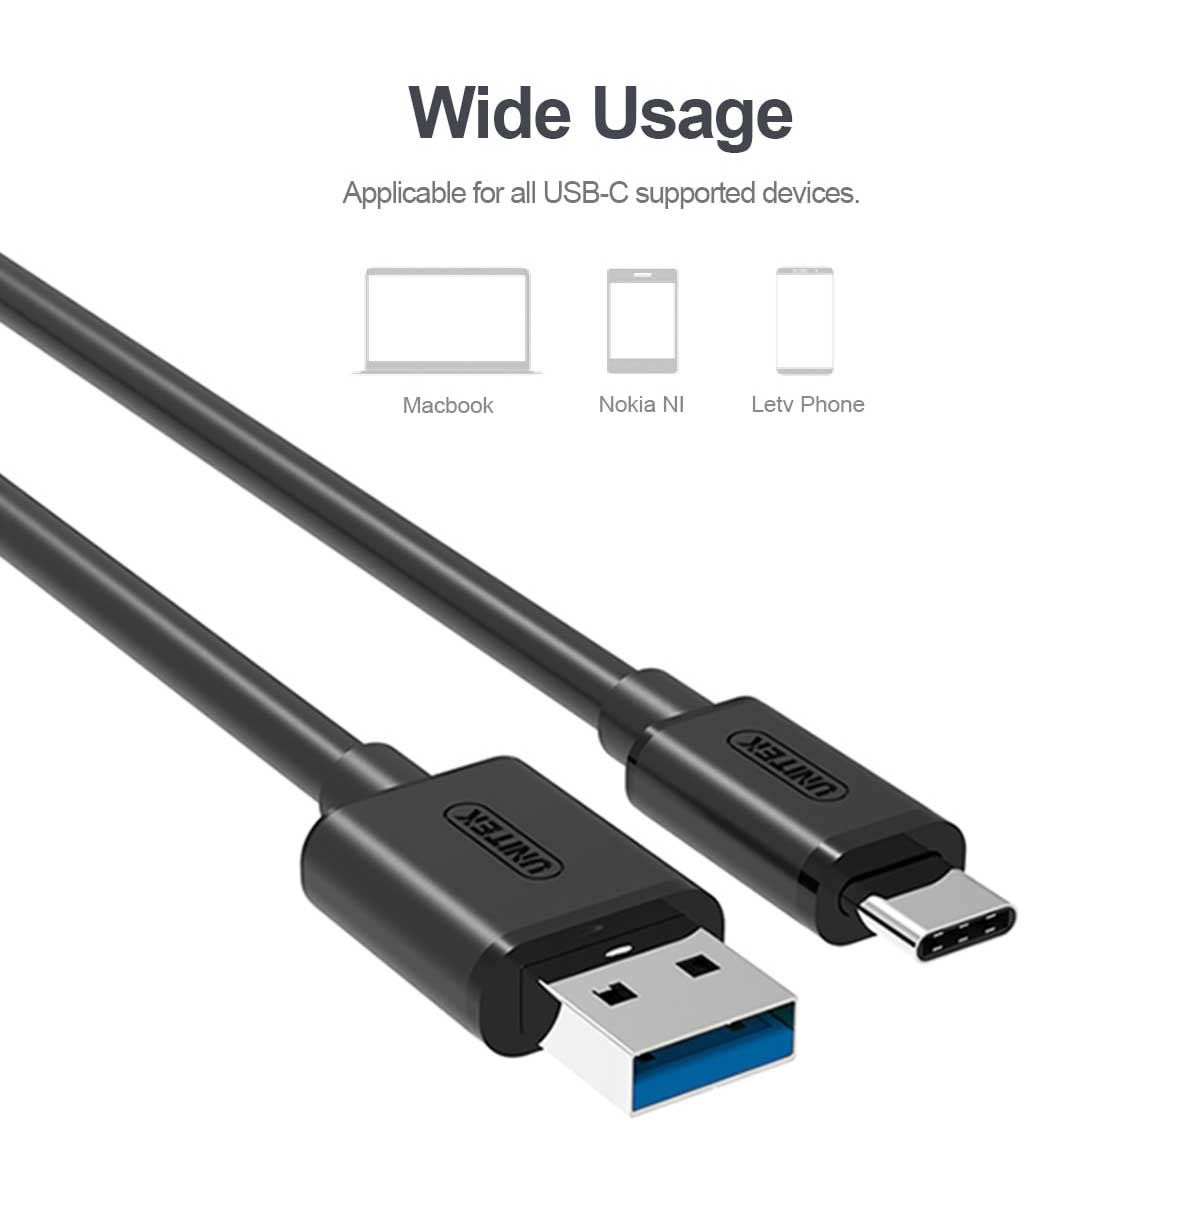 Wide Usage. Applicable for all USB-C supported devices such as Macbook, Tablet, and mobile.